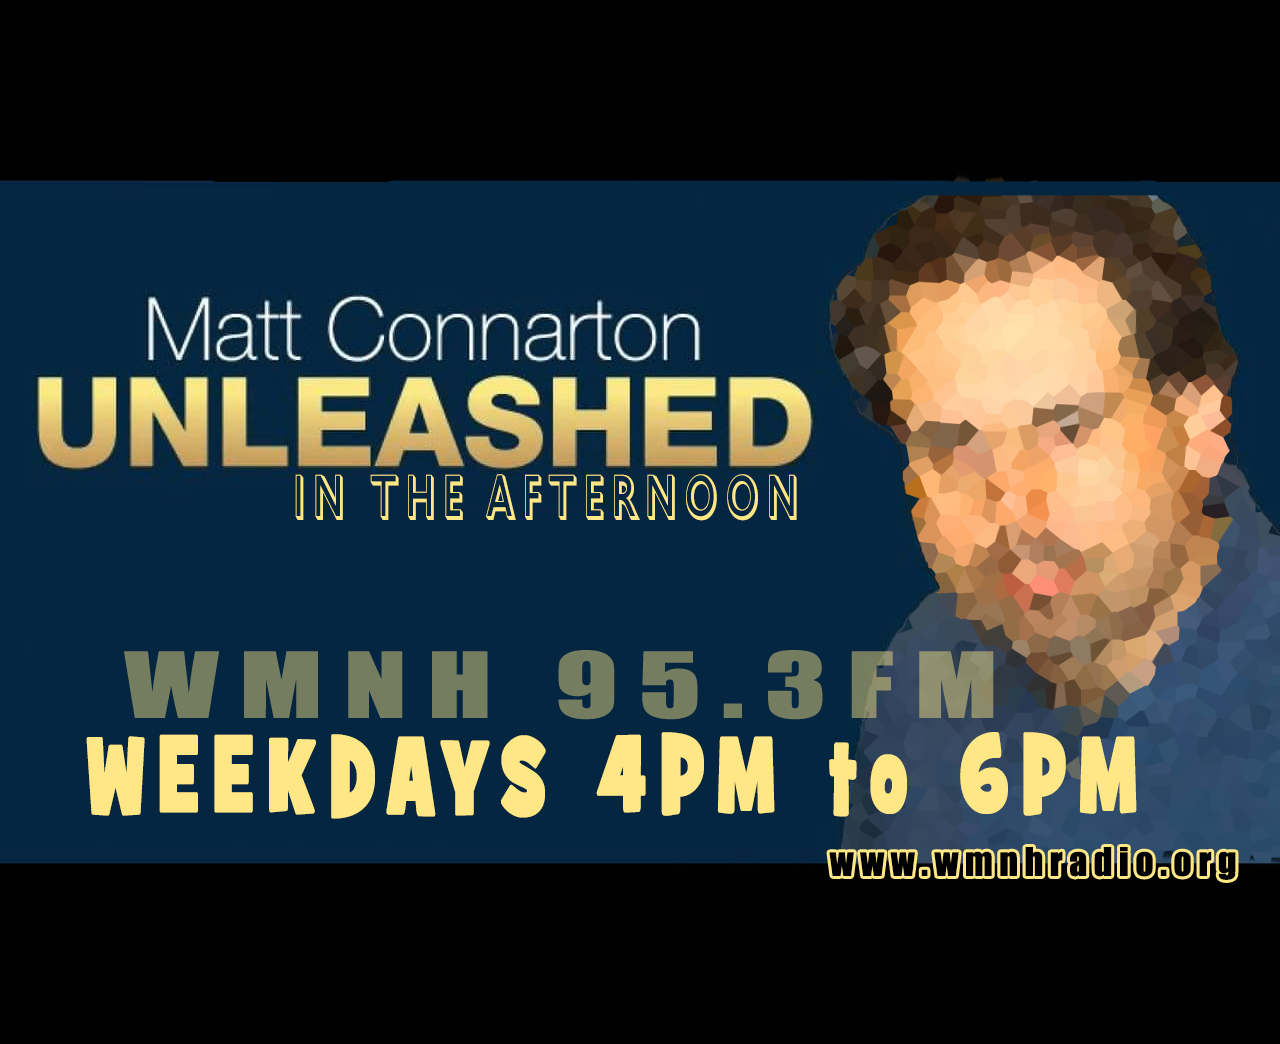 Matt Connarton Unleashed in the Afternoon 10-11-17